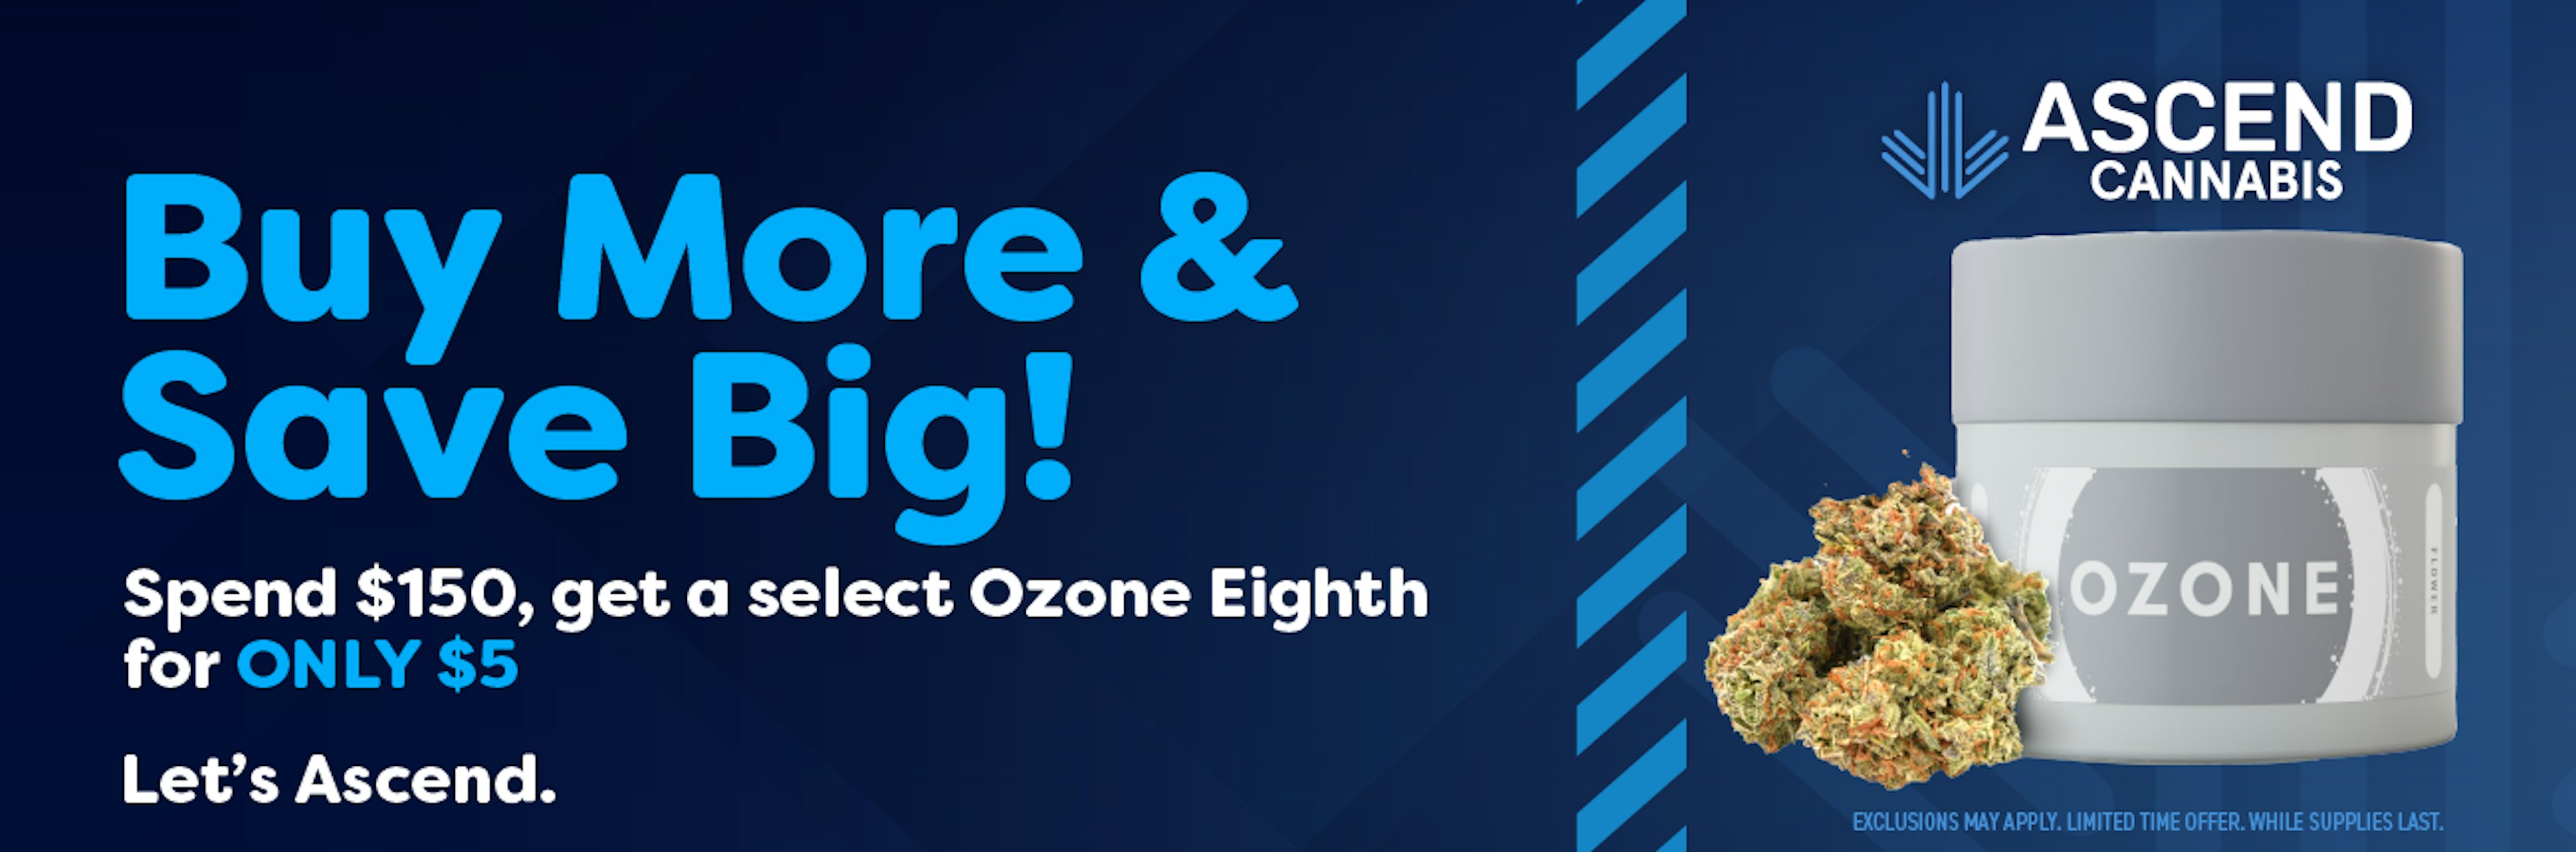 Spend $150,Get a Select Ozone Eighth for $5!